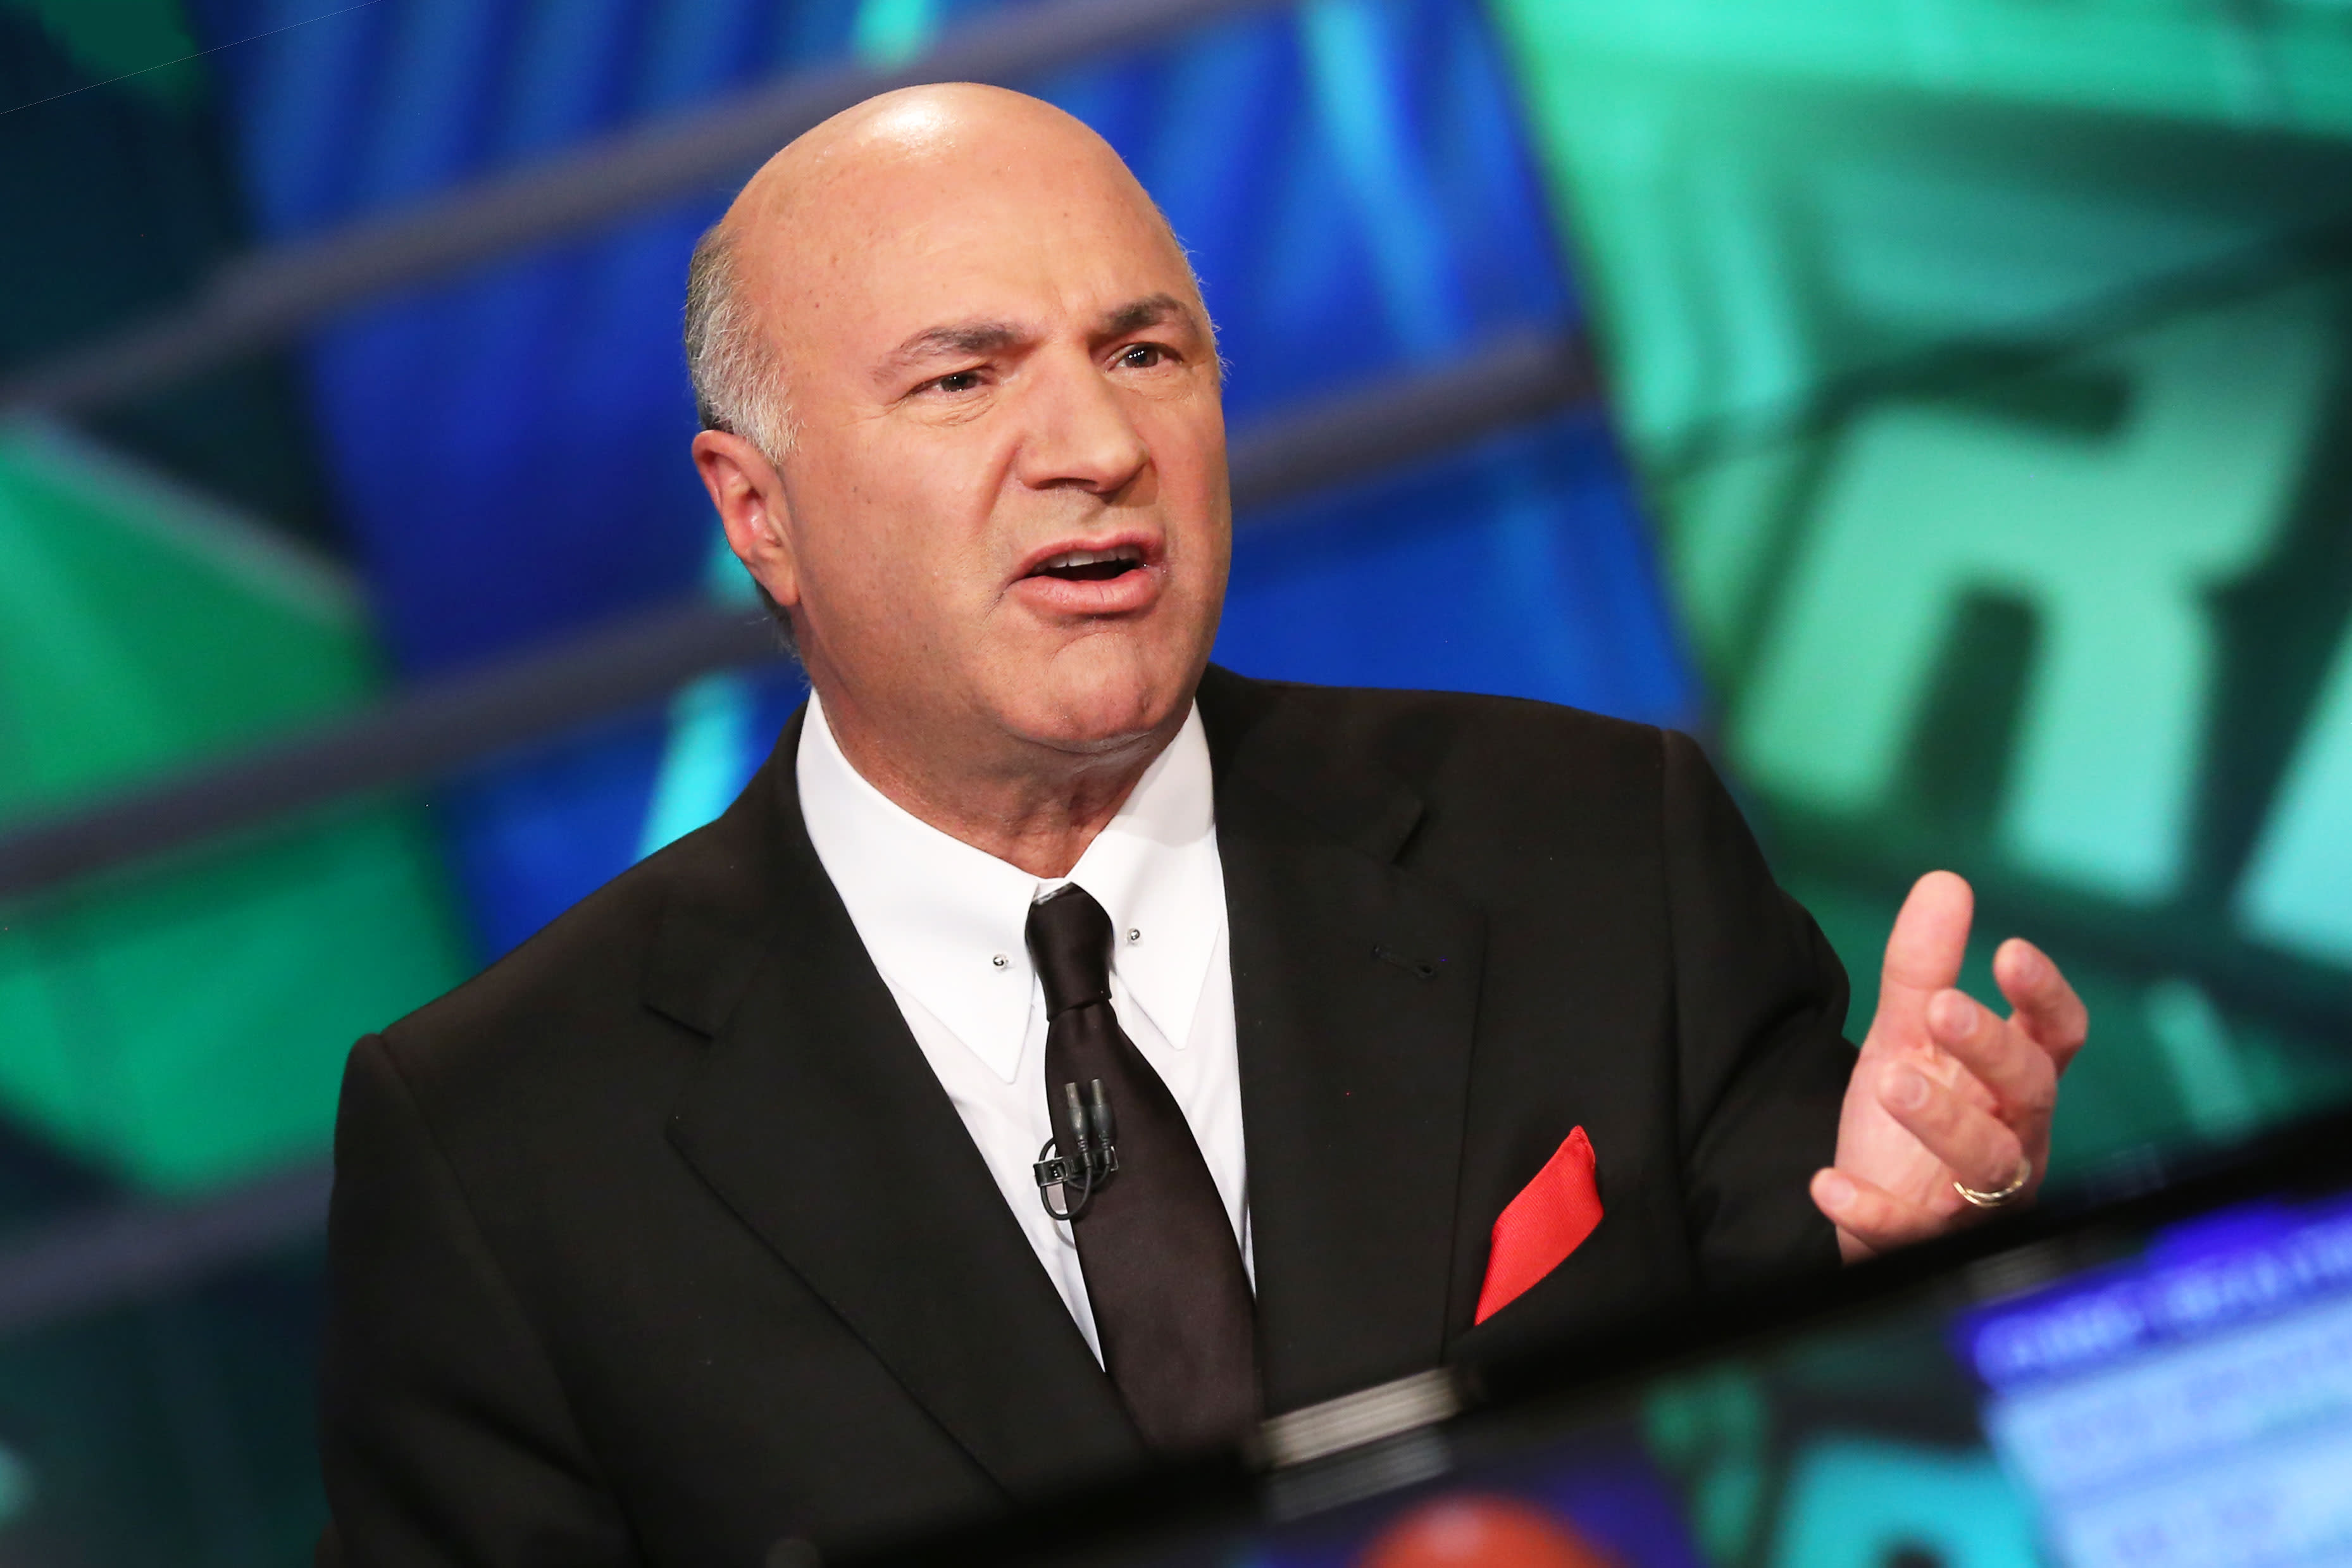 Kevin O’Leary says the US needs to devise economic competition with China